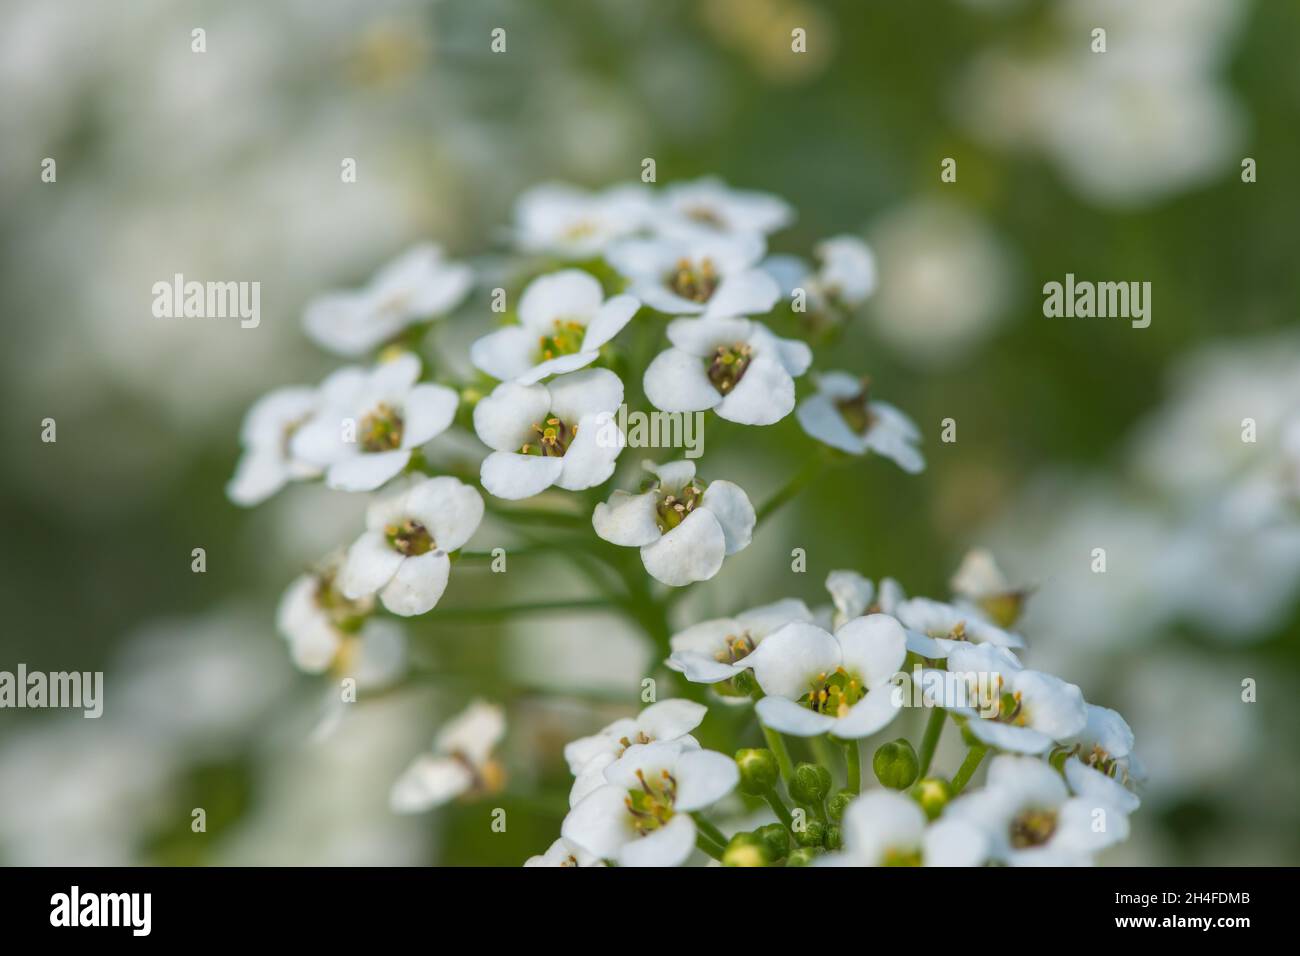 Close up of hornungia alpina flowers in bloom Stock Photo